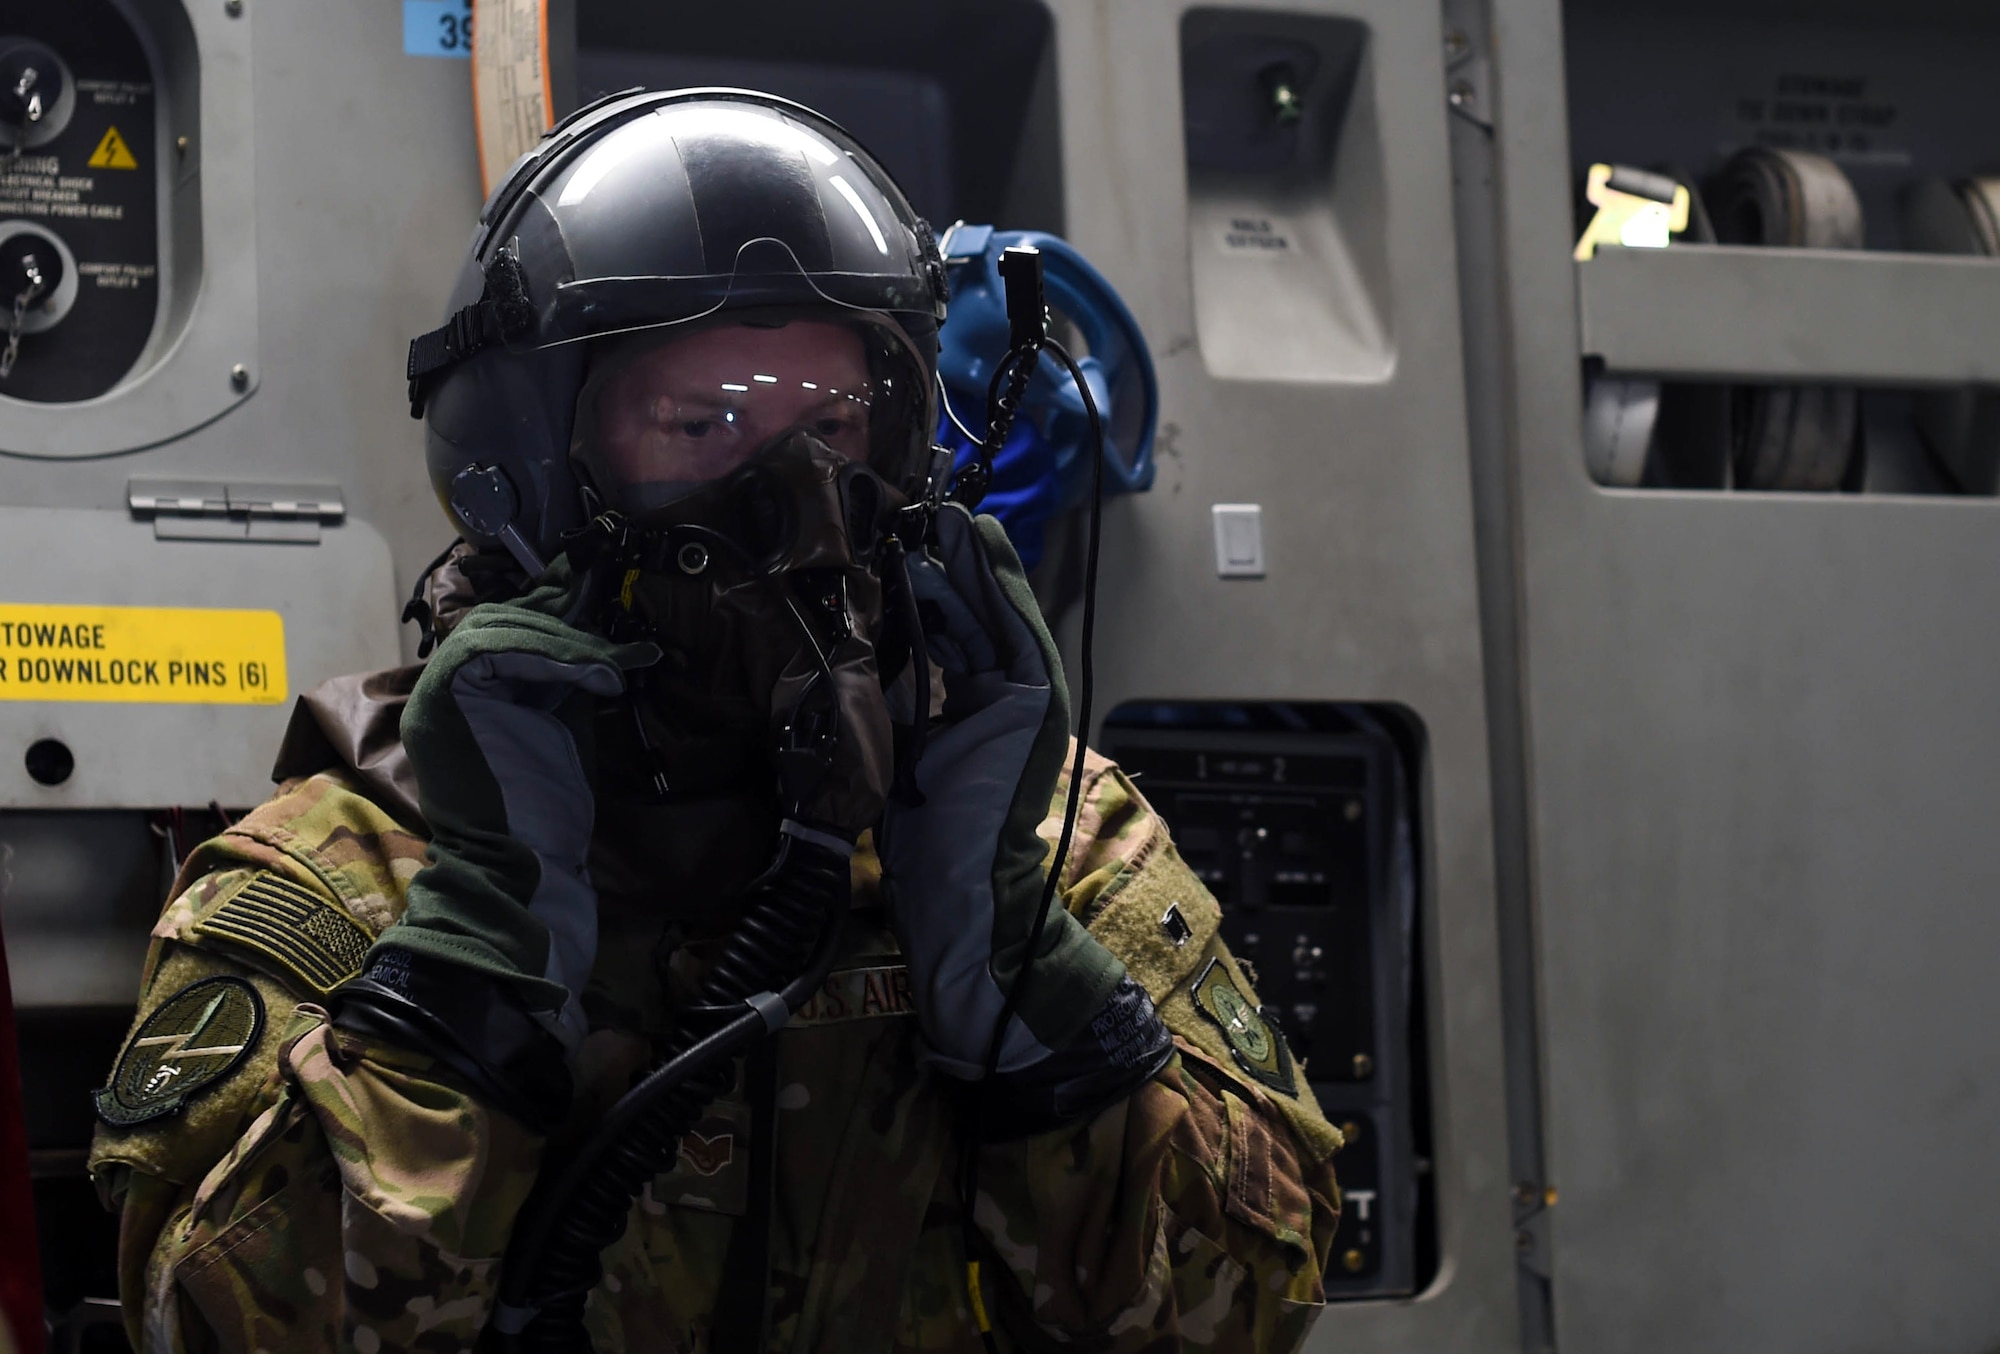 Staff Sgt. Matthew Duck, 7th Airlift Squadron loadmaster, tests the functionality of his aircrew eye and respiratory protection system while flying in a C-17 Globemaster III near Moses Lake, Wash., June 6, 2018. Duck was participating in Exercise Rainier War, which provided insights on how to better execute a tactical scenario for possible future conflicts. (U.S. Air Force photo by Senior Airman Tryphena Mayhugh)